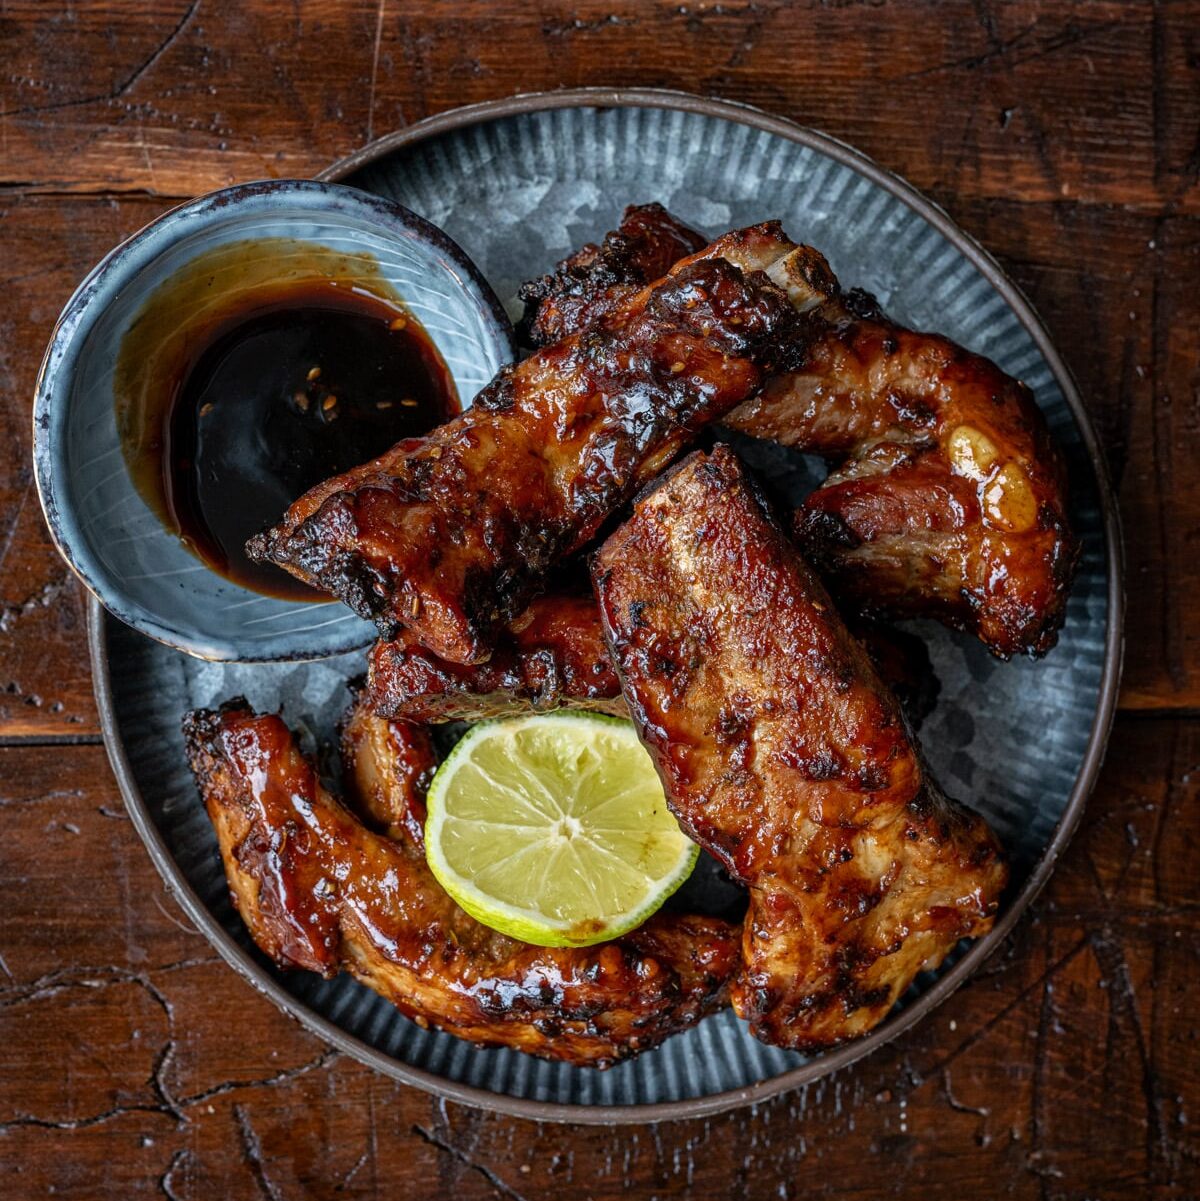 Plate of air fryer pork ribs with side of dipping sauce